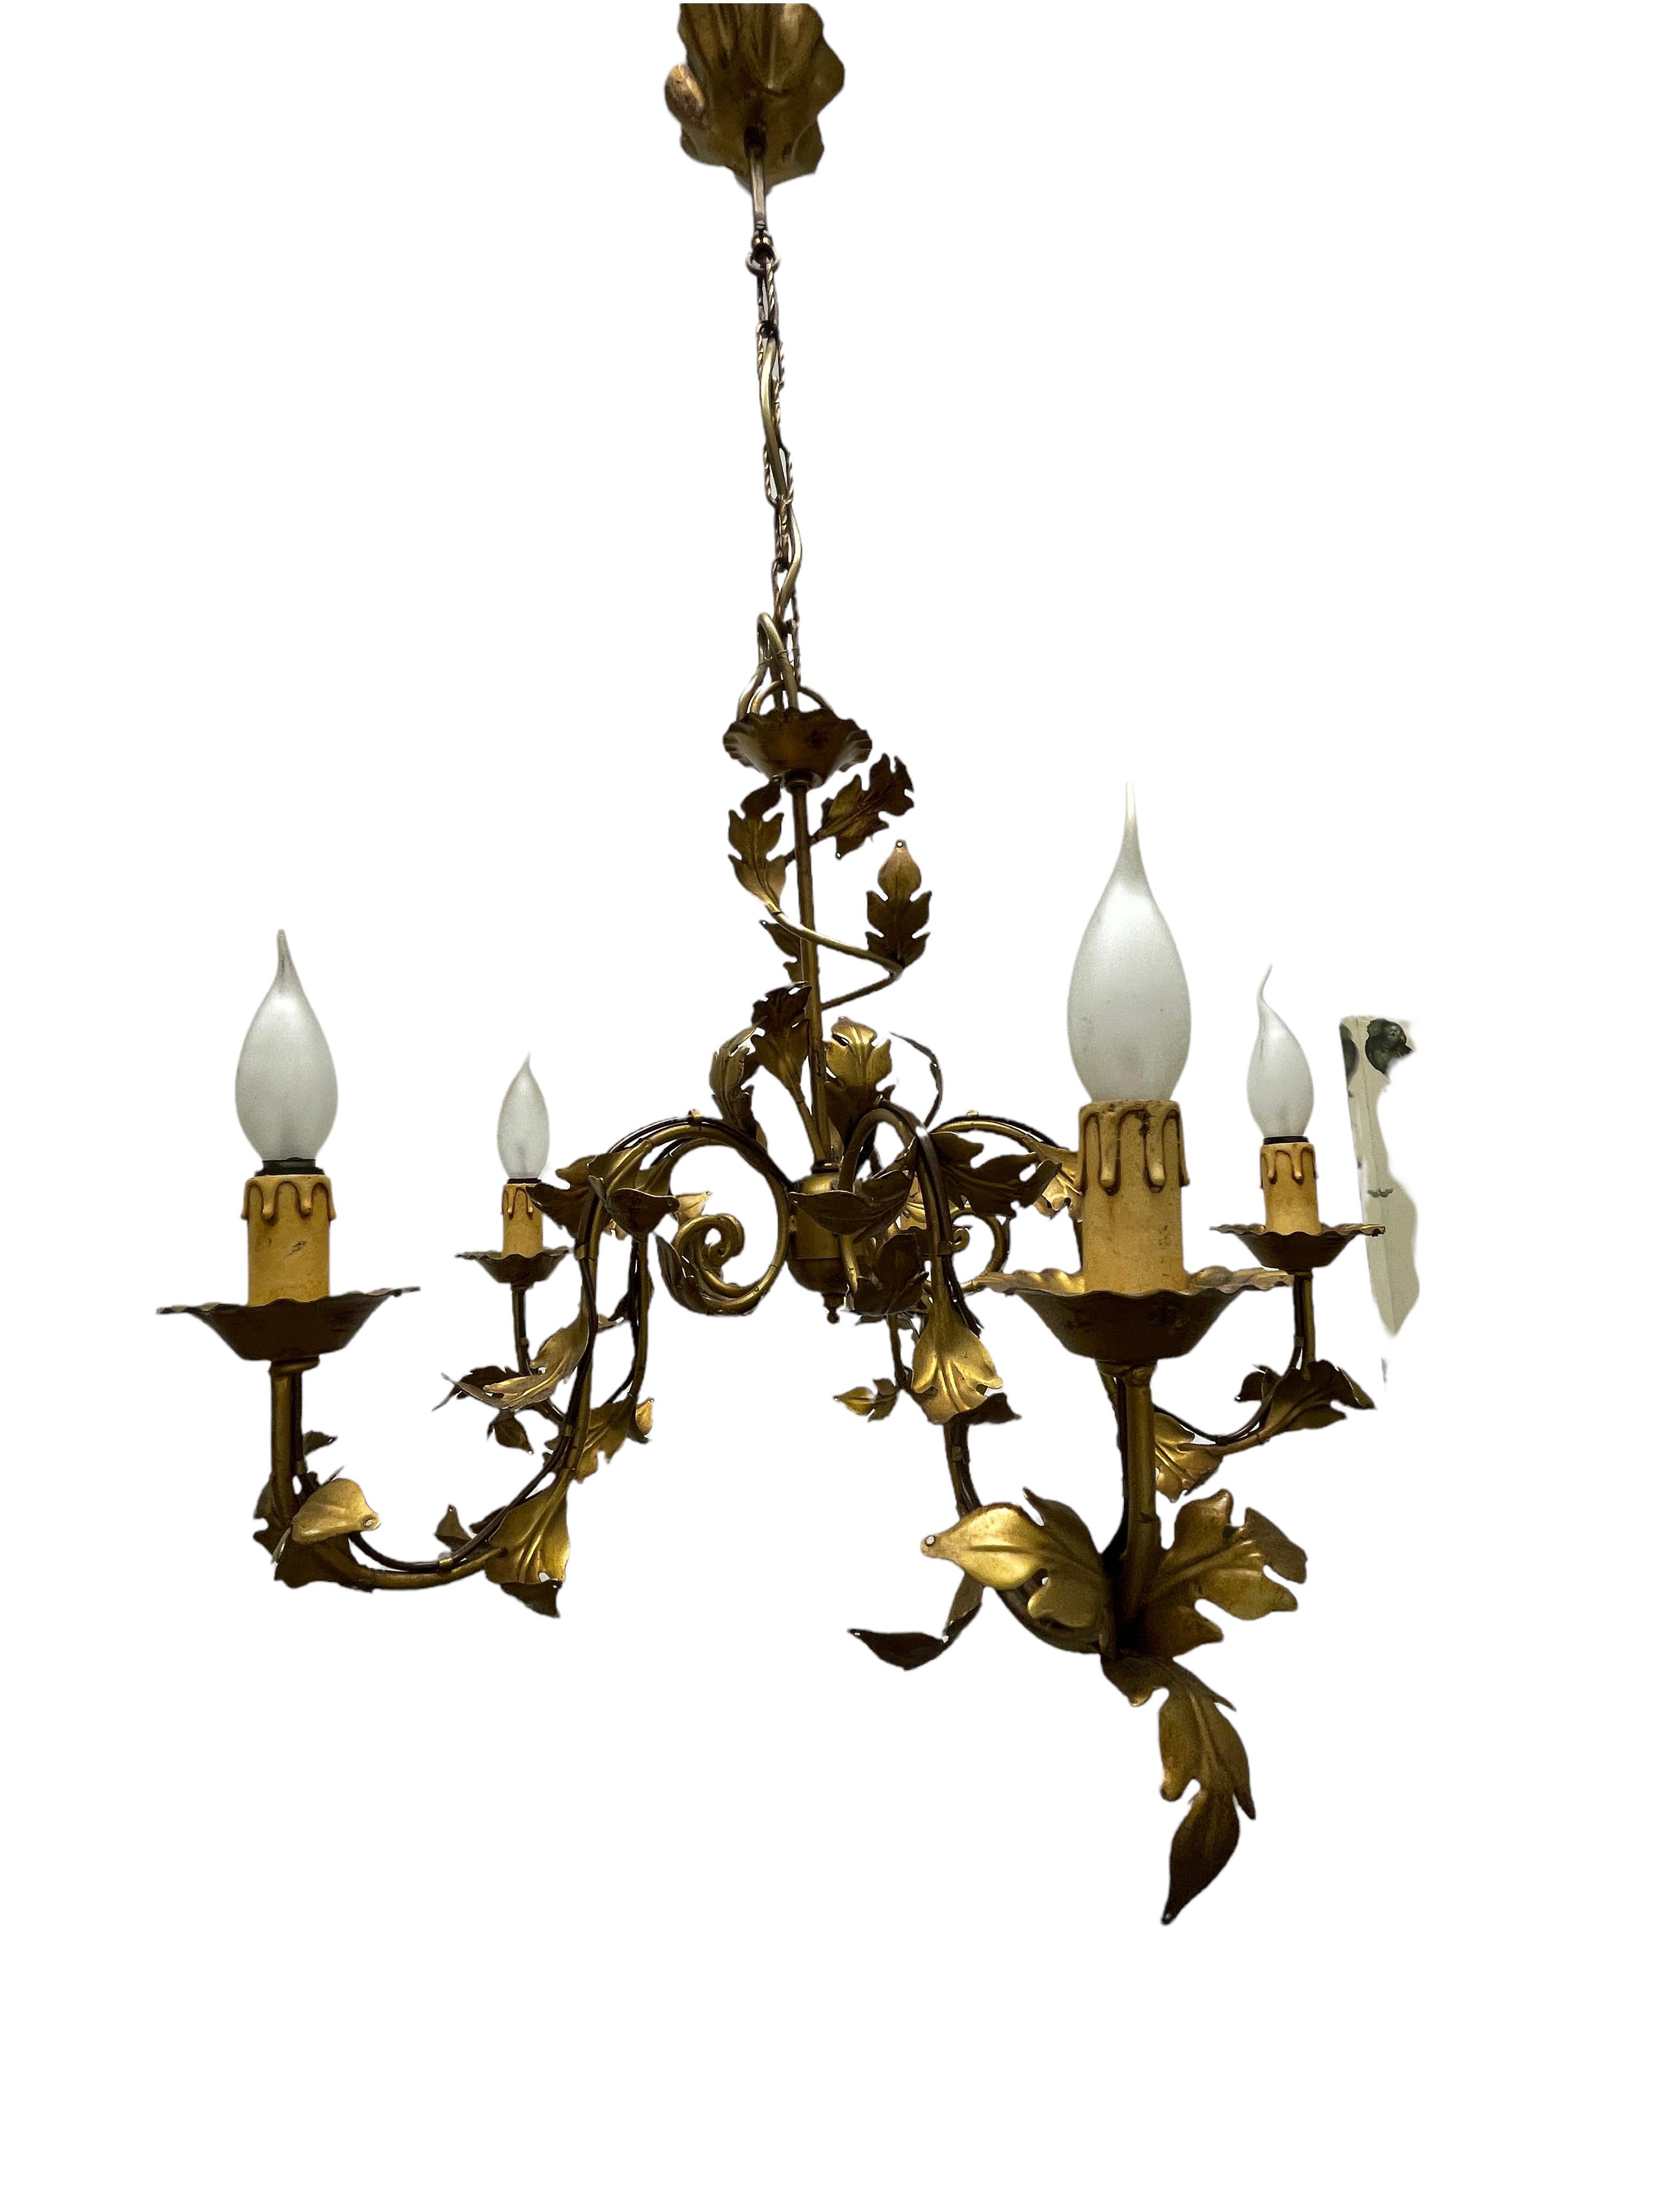 Beautiful Leaf Five-Light Tole Hollywood Regency Chandelier Gilded, Italy, 1960s For Sale 3